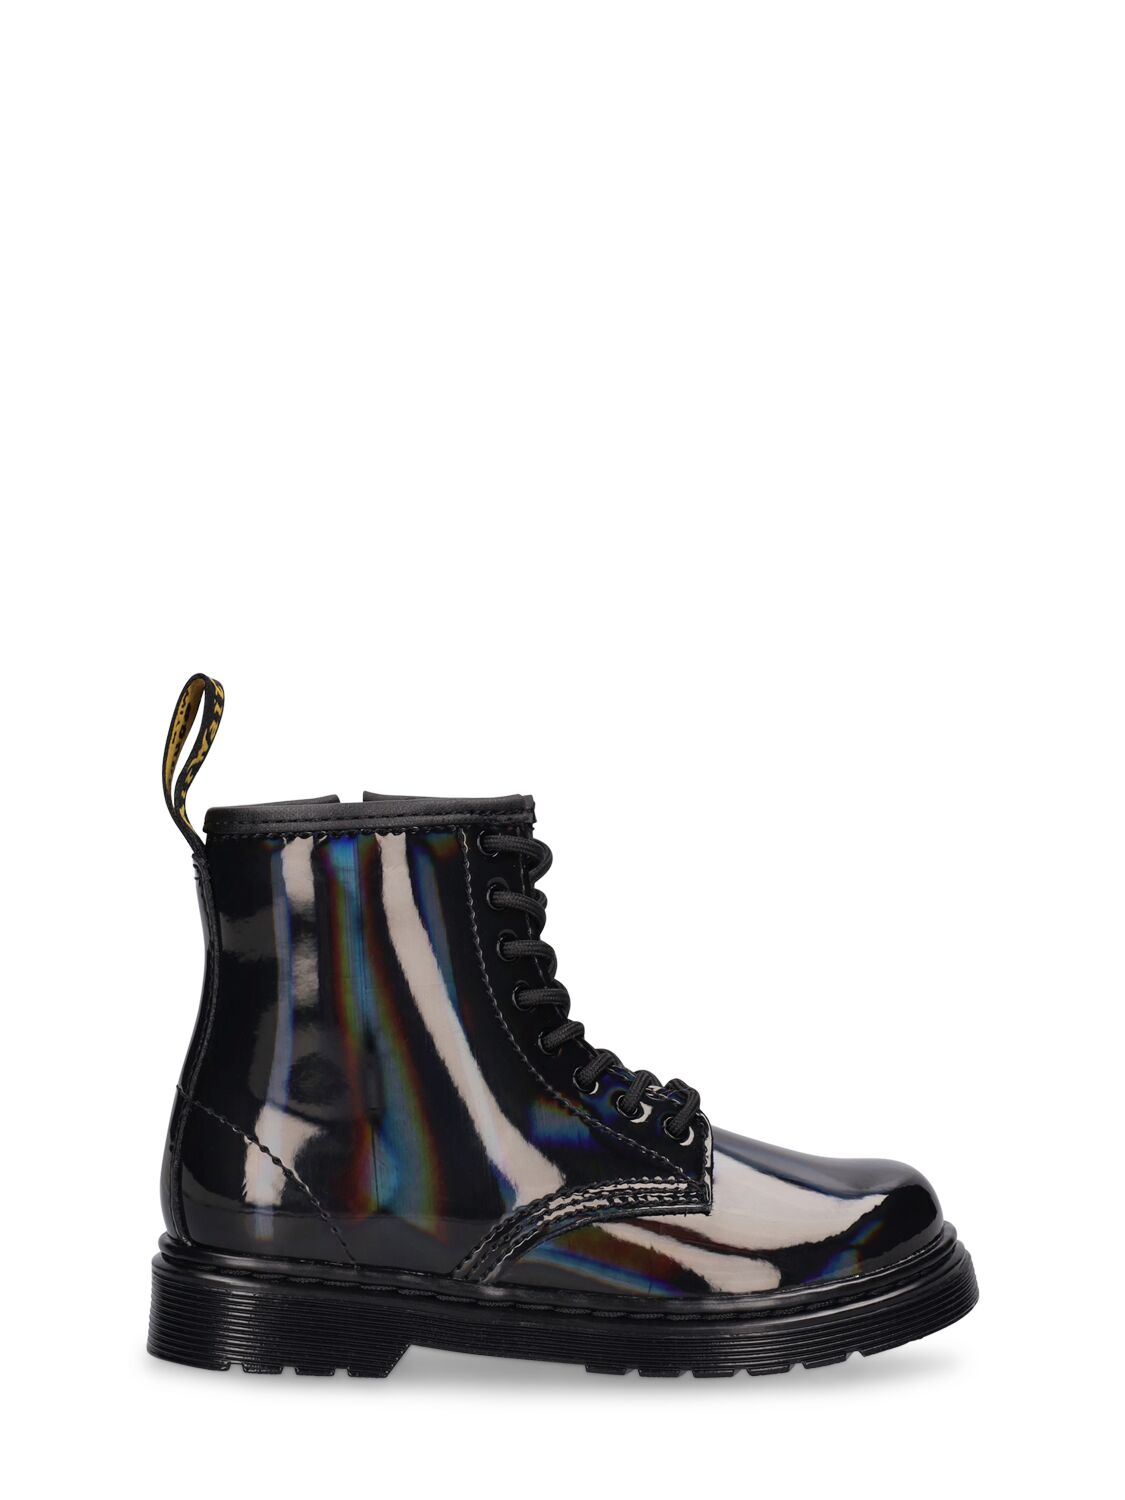 Dr. Martens' Kids' 1460 Patent Iridescent Leather Boots